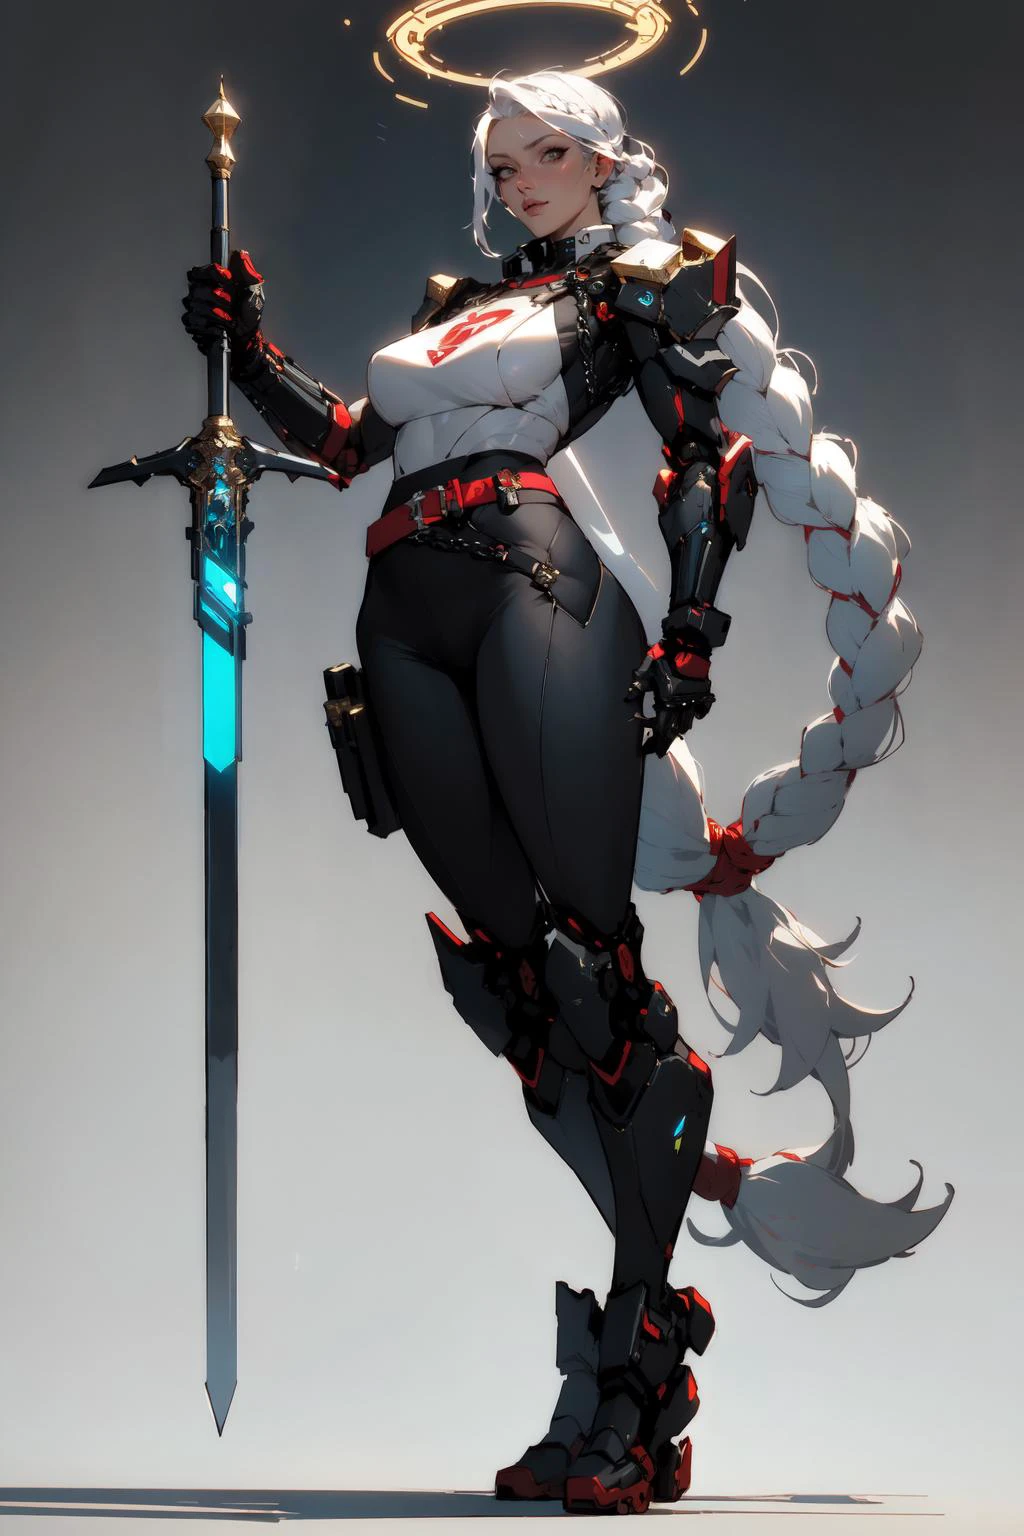 nijistyle, full body of cyberpunk paladin lady holding big glowing sword, white tabard, pauldrons, white hair, braid, red belt, cybernetic halo, mechanical arm, simple background 